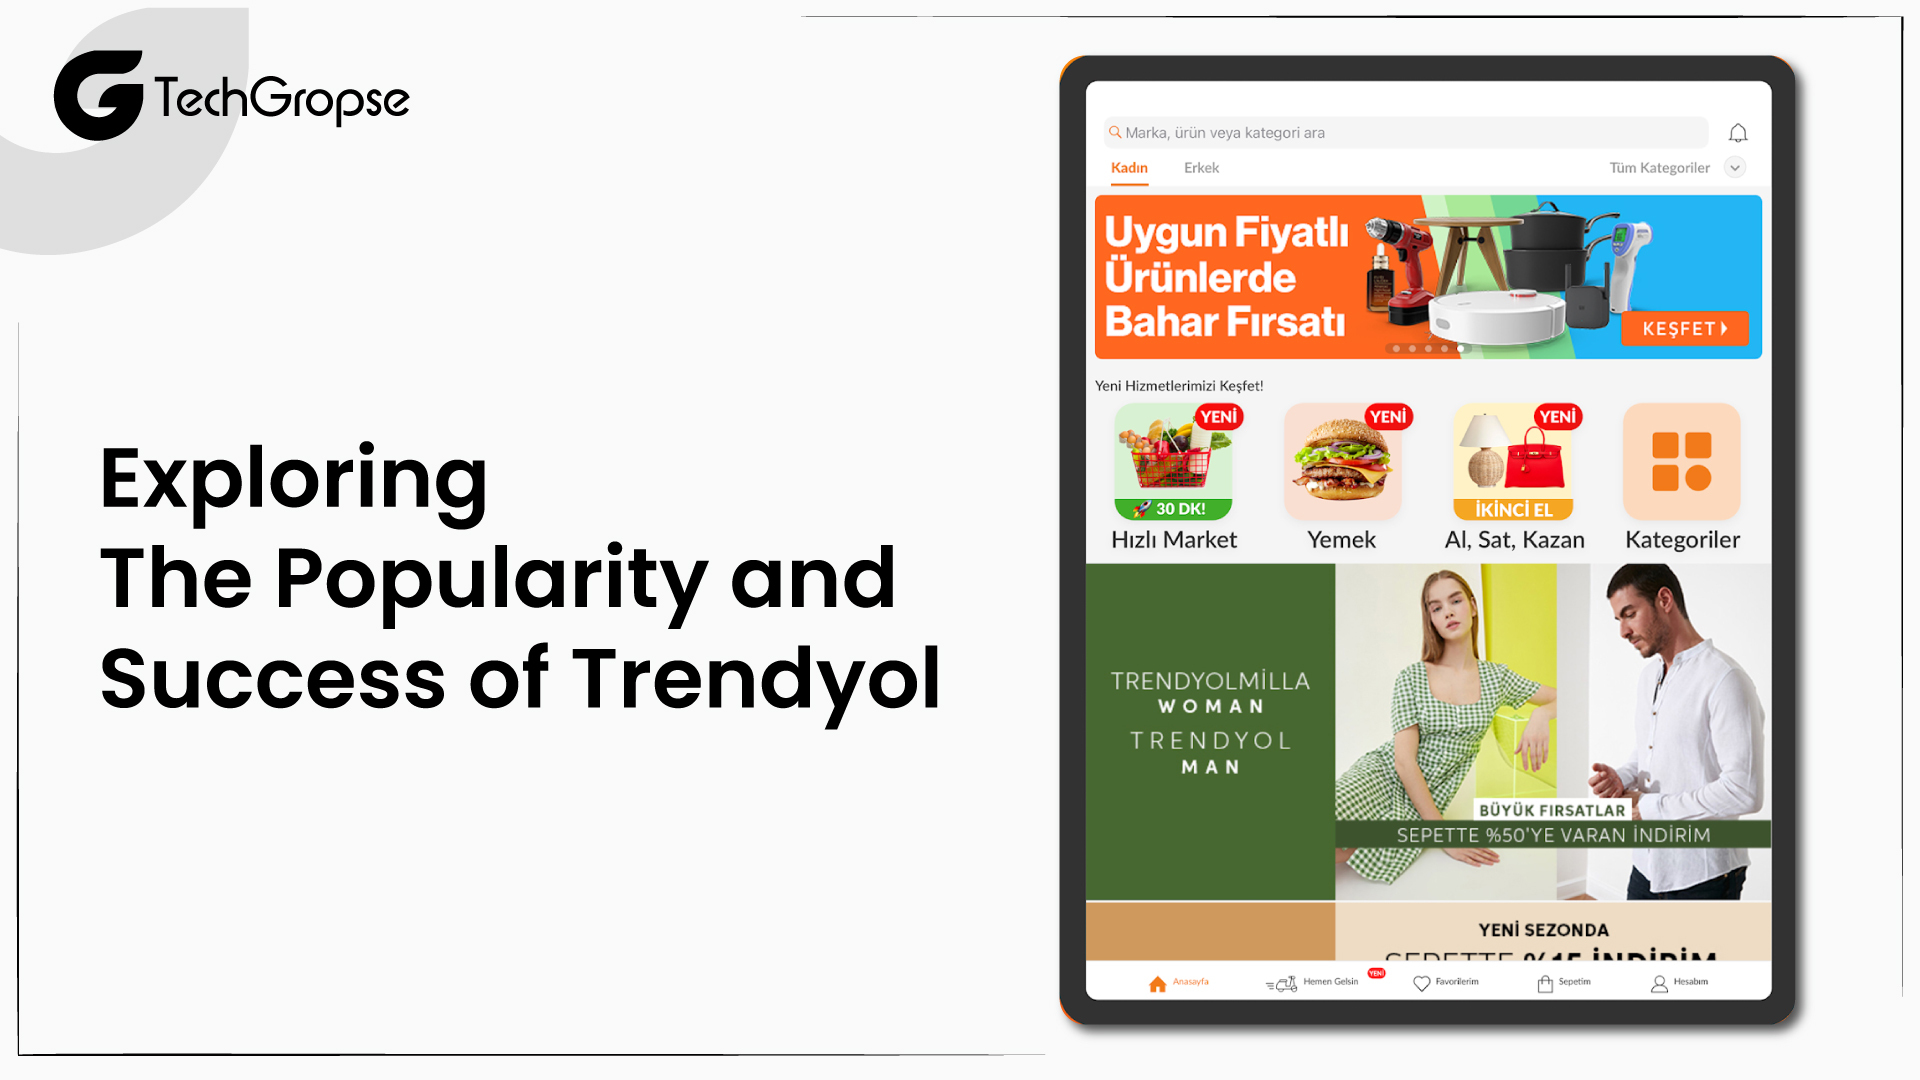 Exploring The Popularity and Success of Trendyol